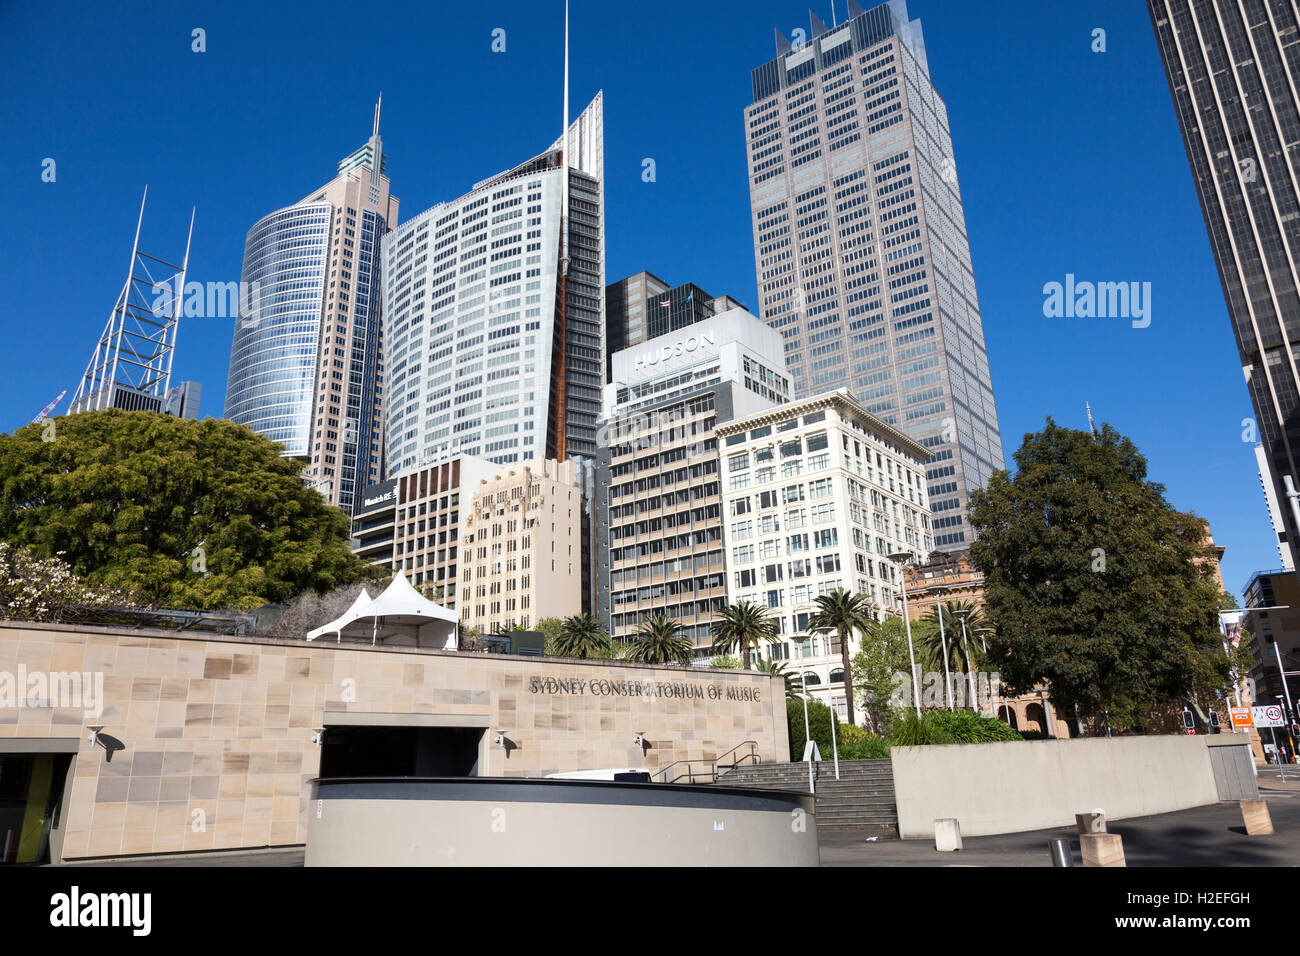 Sydney conservatorium of music and Aurora place, Chifley Tower and Governor Macquarie tower behind,Sydney,Australia Stock Photo